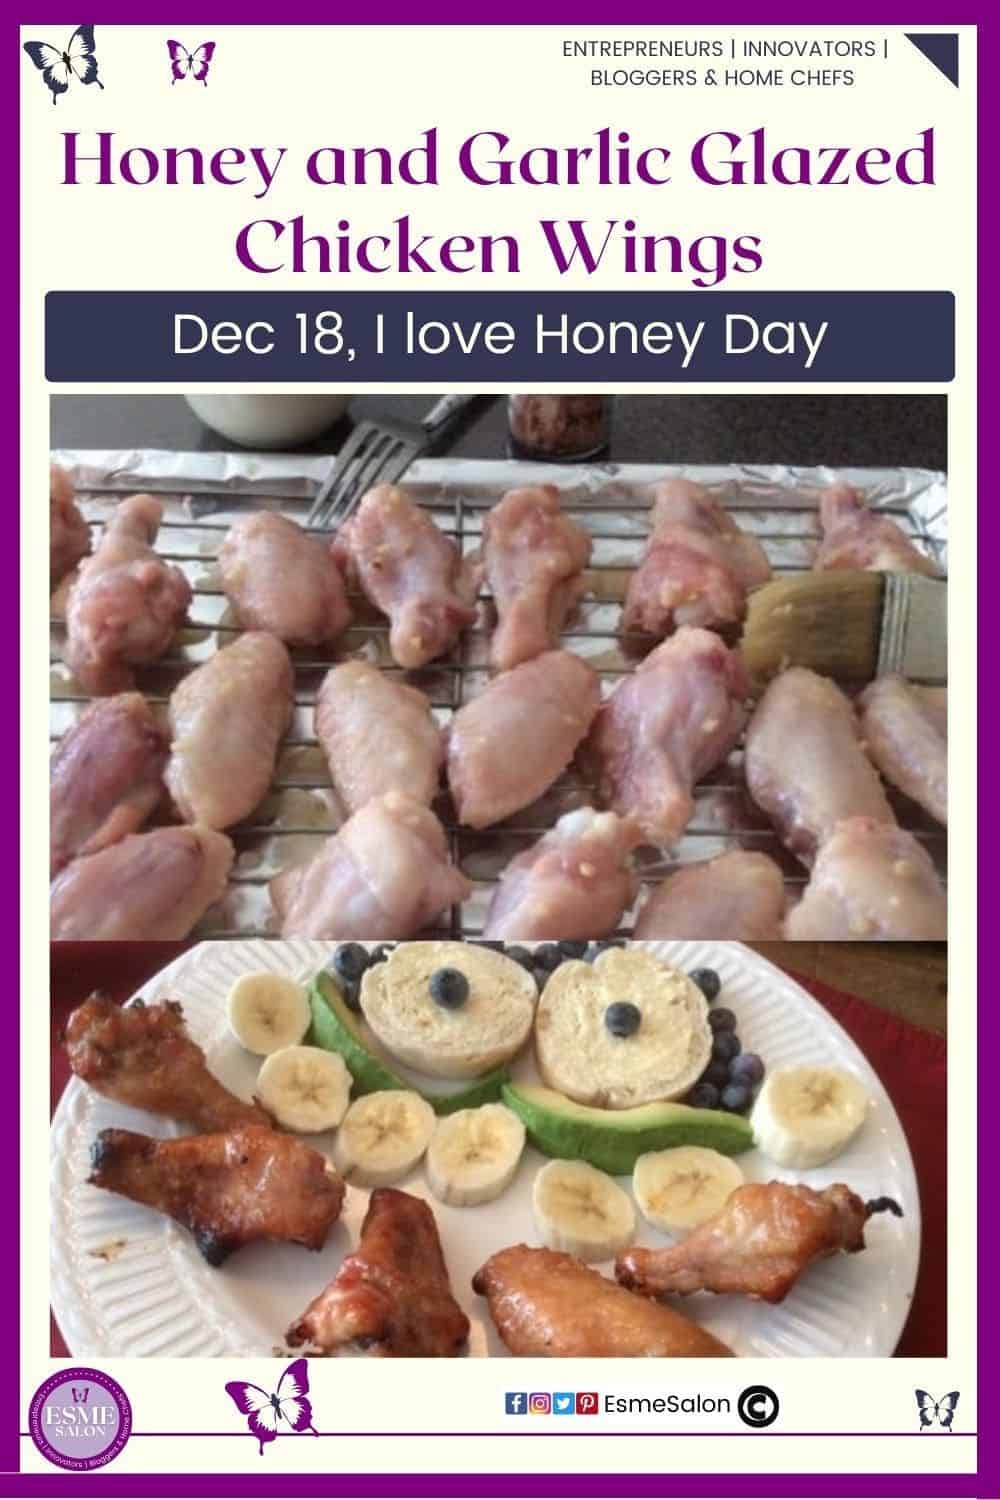 an image of raw chicken pieces on a wire rack already glazed as well as a plate of cooked chicken wings plated with bread, blueberries and banana slices